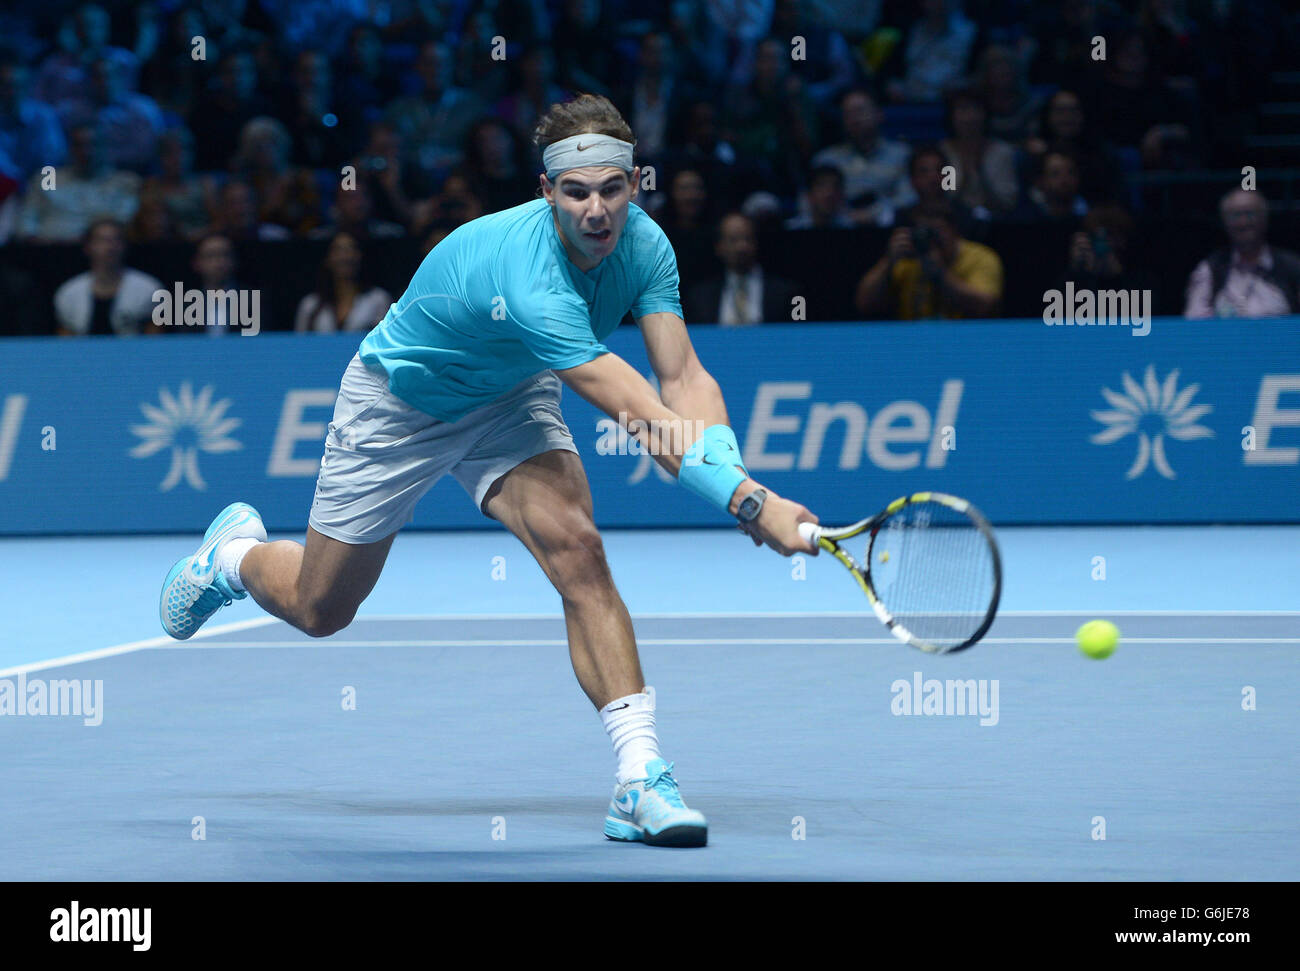 Spain's Rafael Nadal stretches for a ball during his match against Serbia's Novak Djokovic during day eight of the Barclays ATP World Tour Finals at the O2 Arena, London. PRESS ASSOCIATION Photo. Picture date: Monday November 11, 2013. See PA story TENNIS London. Photo credit should read: Adam Davy/PA Wire Stock Photo